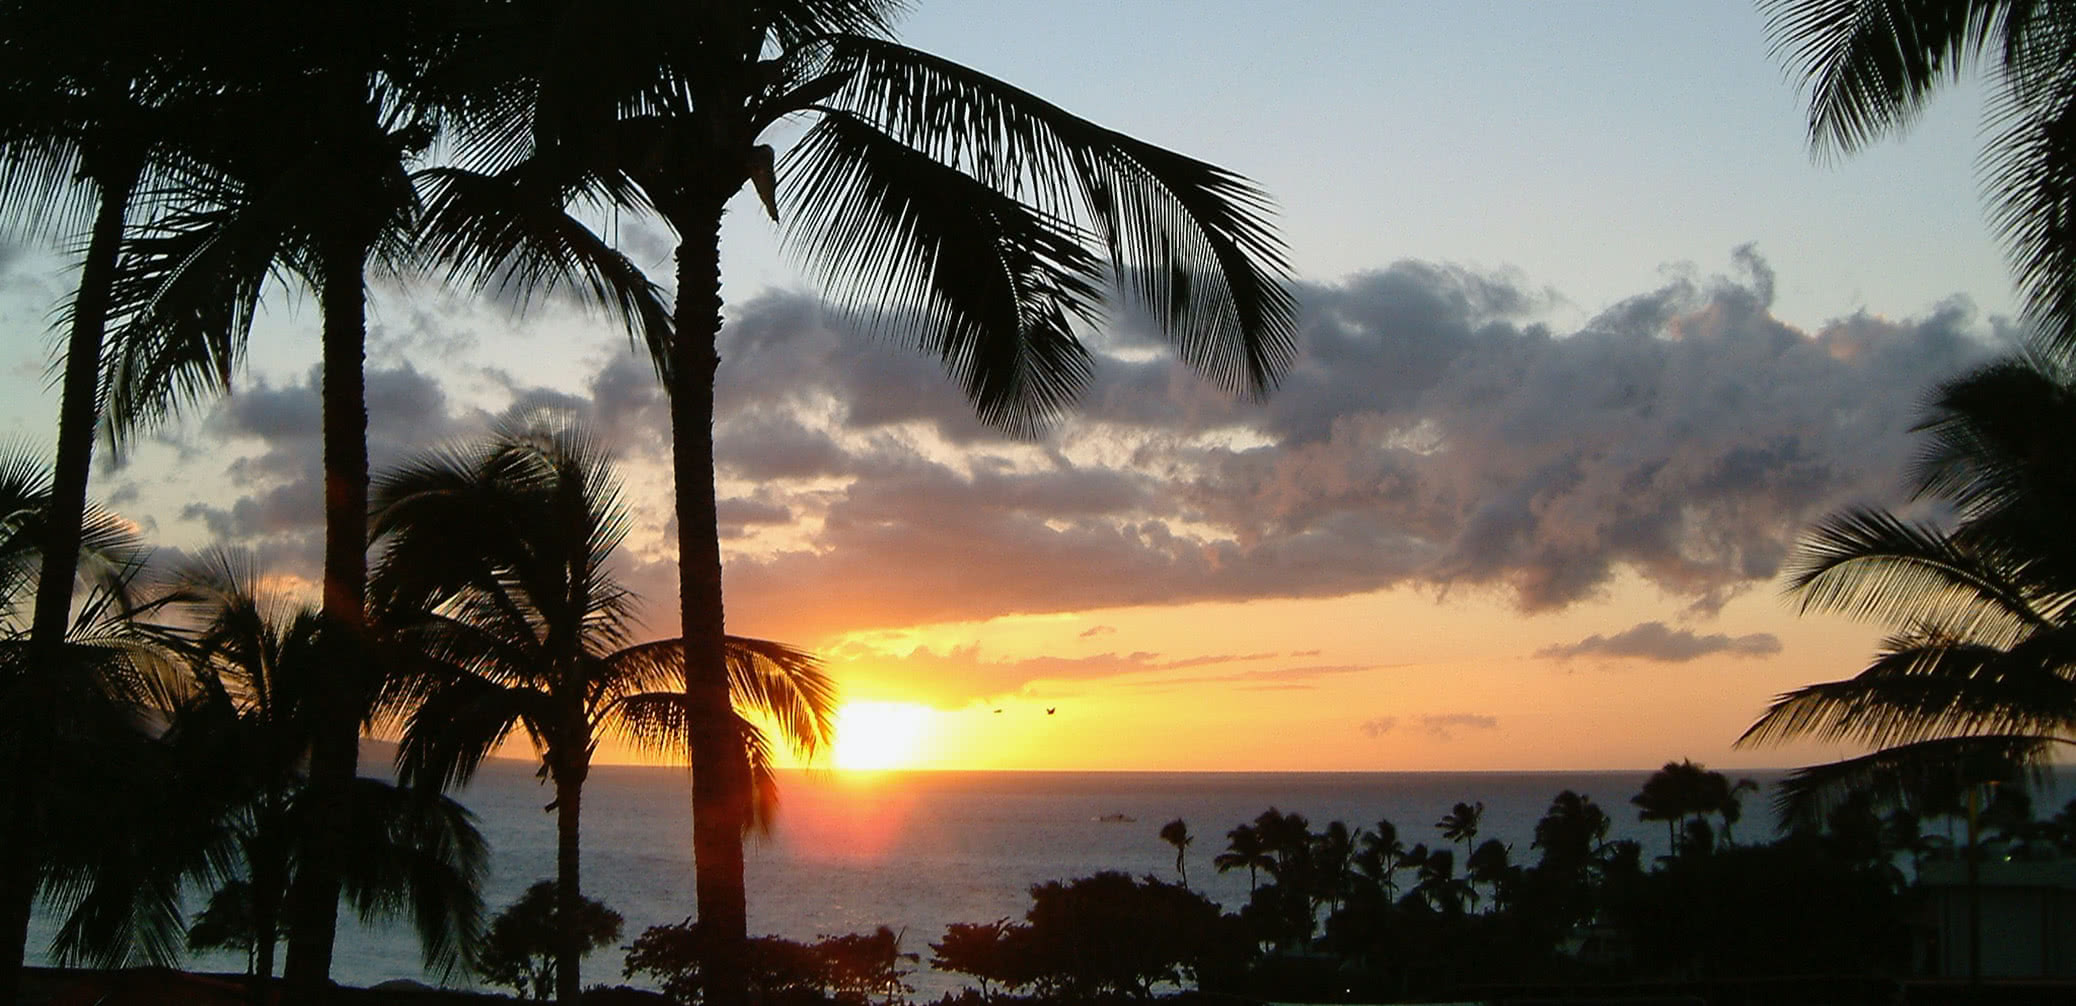 How Much Is Parking At Four Seasons Maui, Oahu and Hualalai In Hawaii?